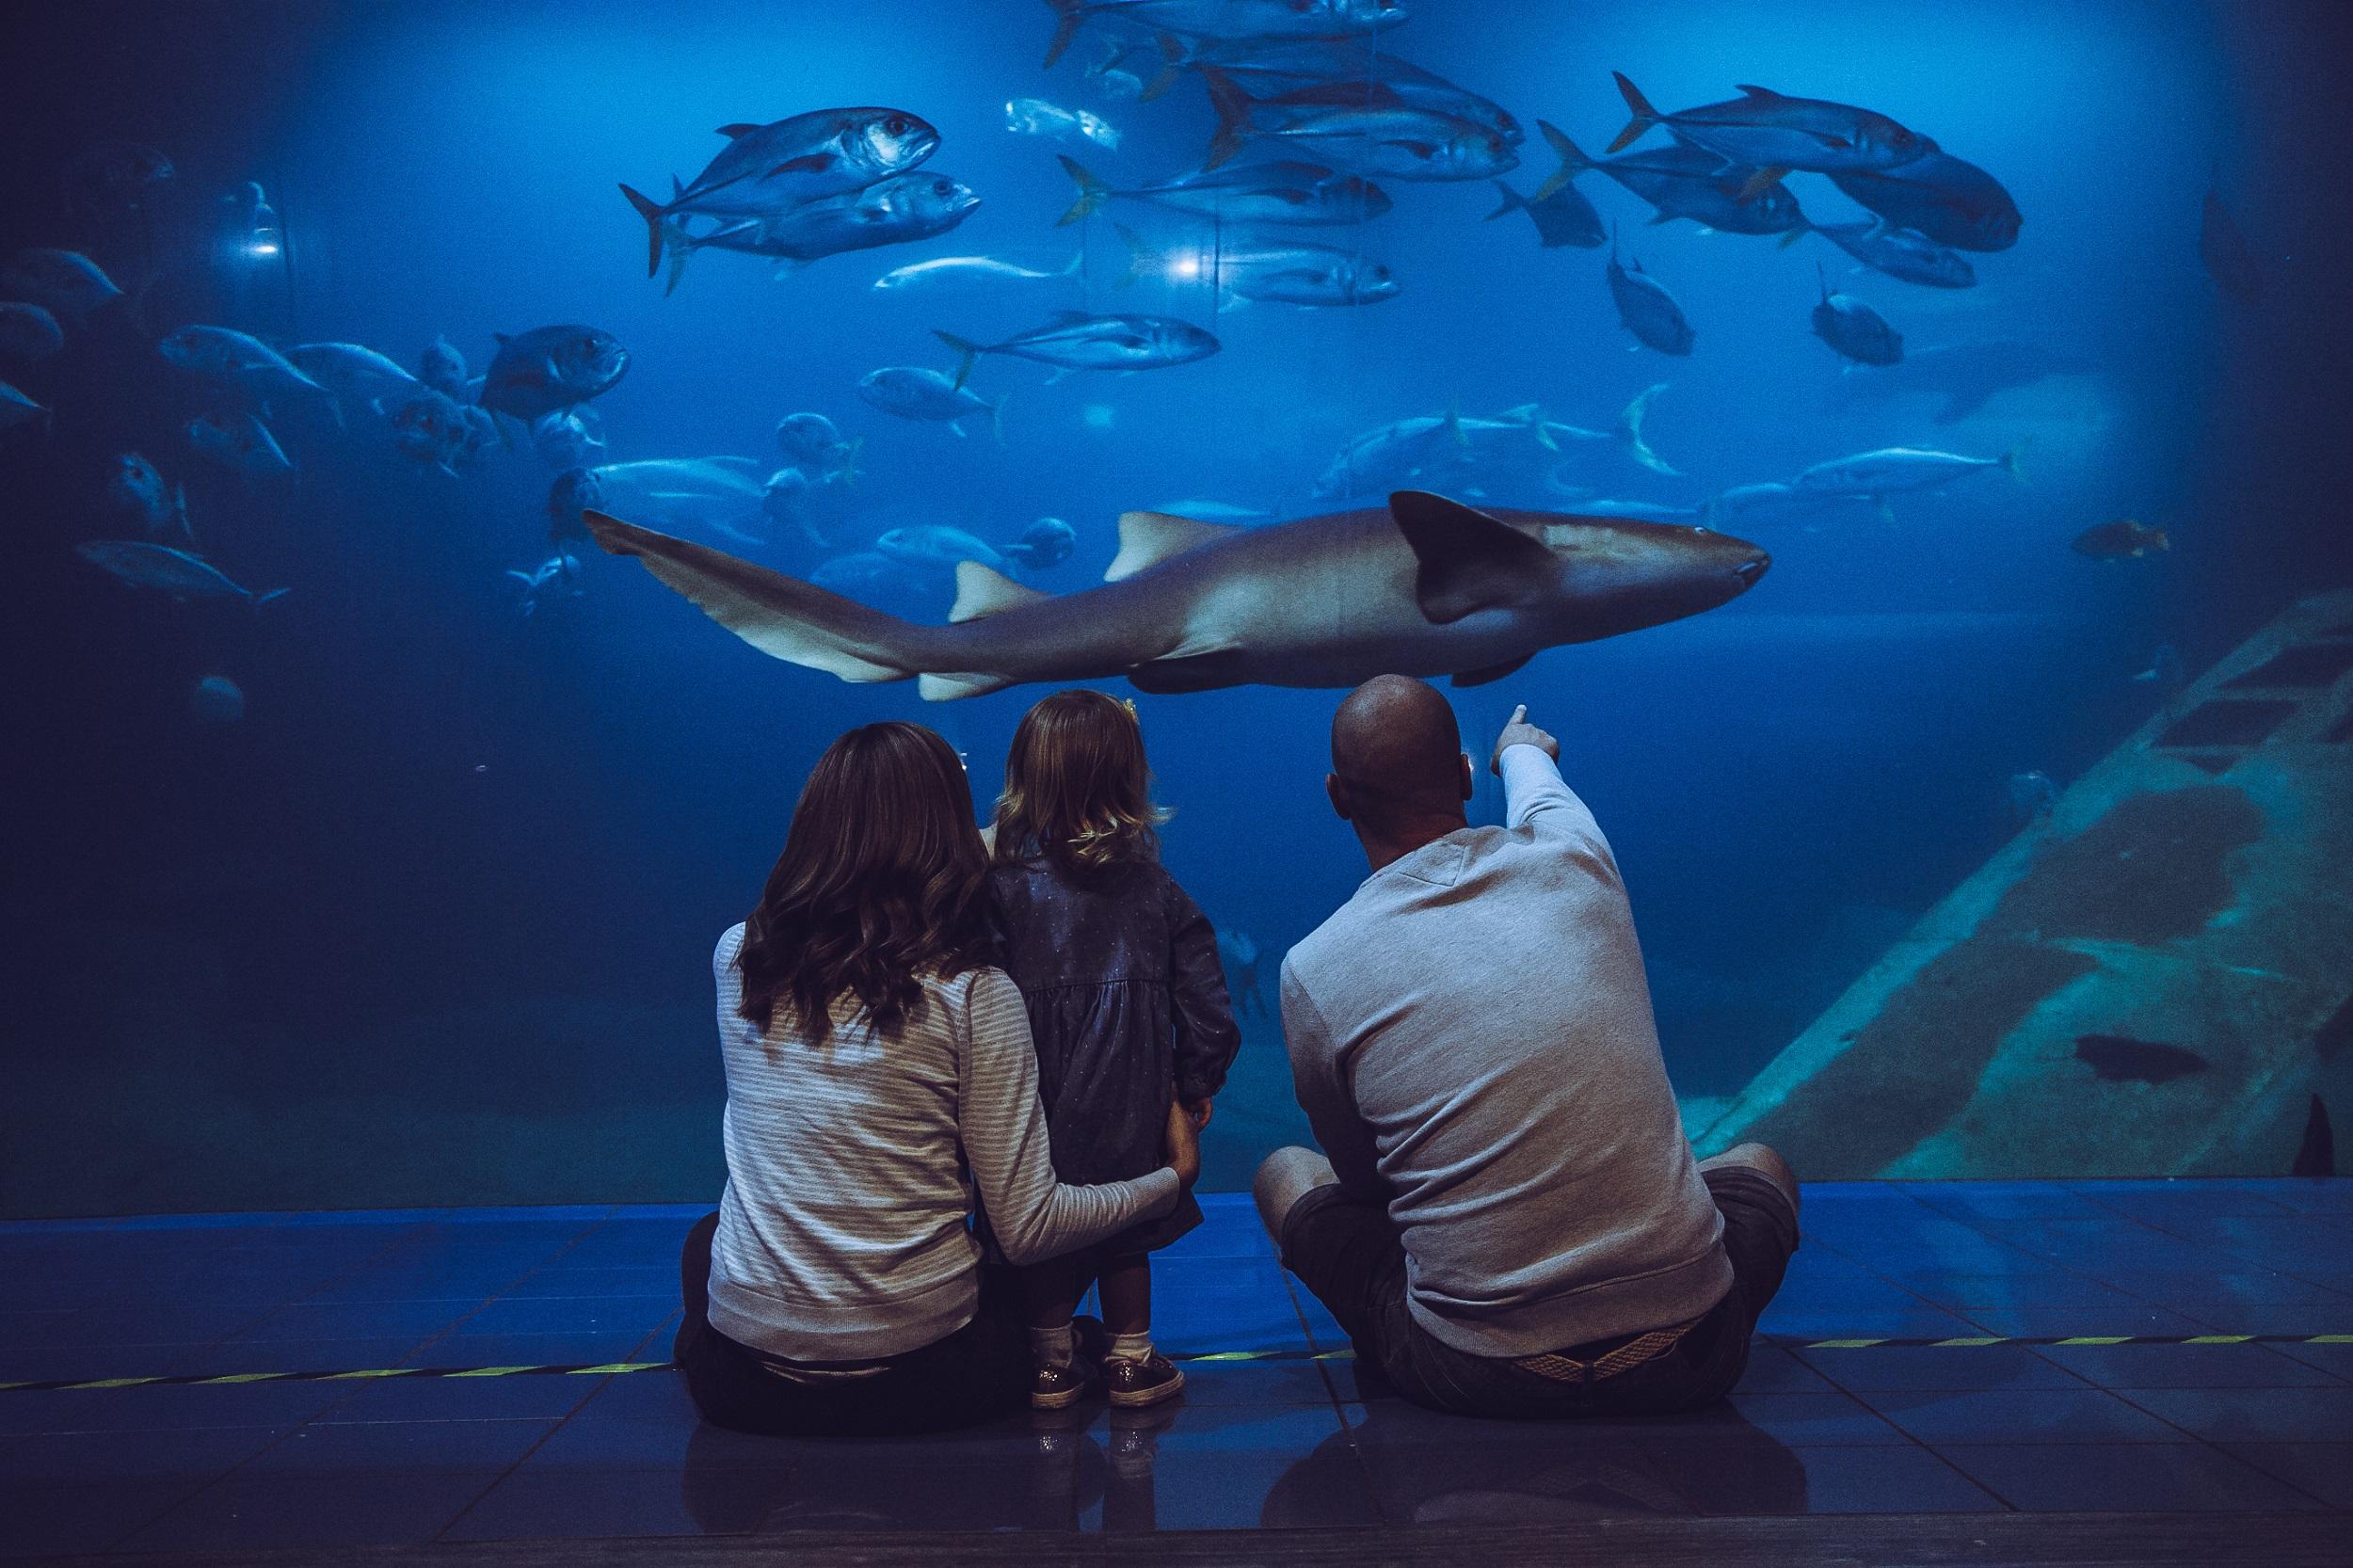 A family celebrate the summer holidays at the aquarium with their child.